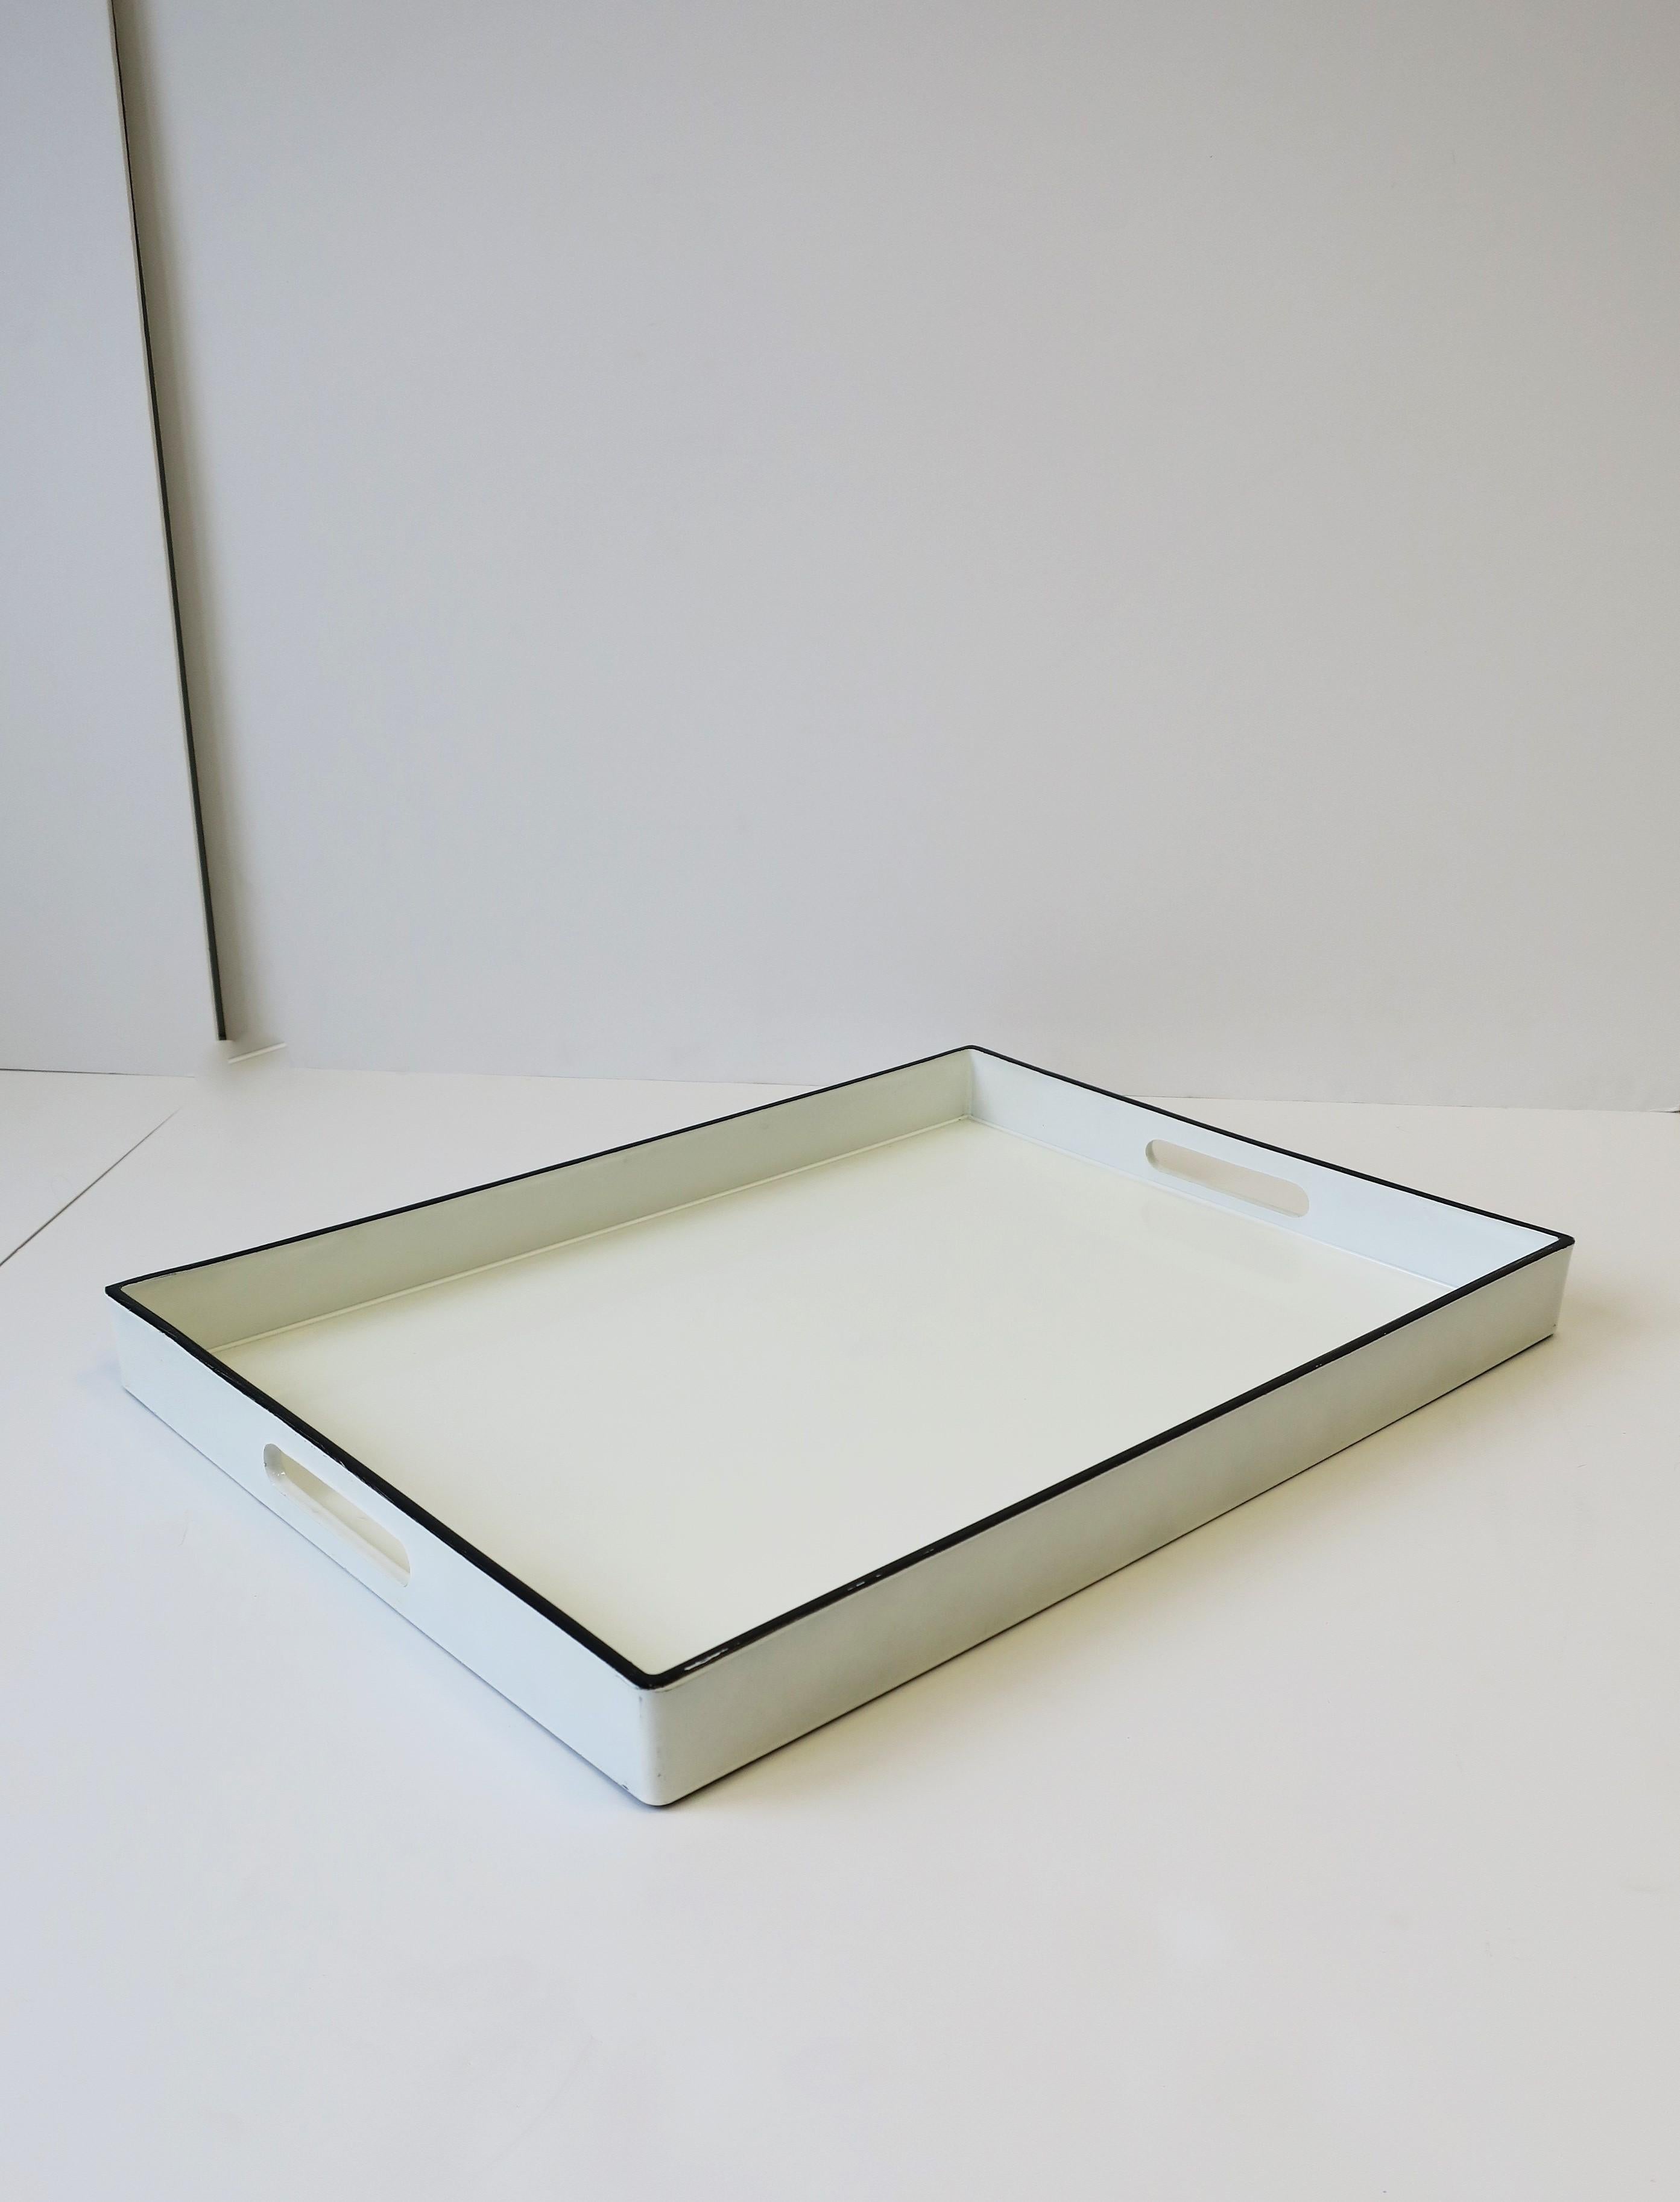 A great Modern or Minimalist style white and black lacquer rectangular serving tray with cut-out handles. Tray is white lacquer with black edge/trim. A great piece or any bar, bar cart, entertaining area or to hold books, etc. on a table. Many uses.